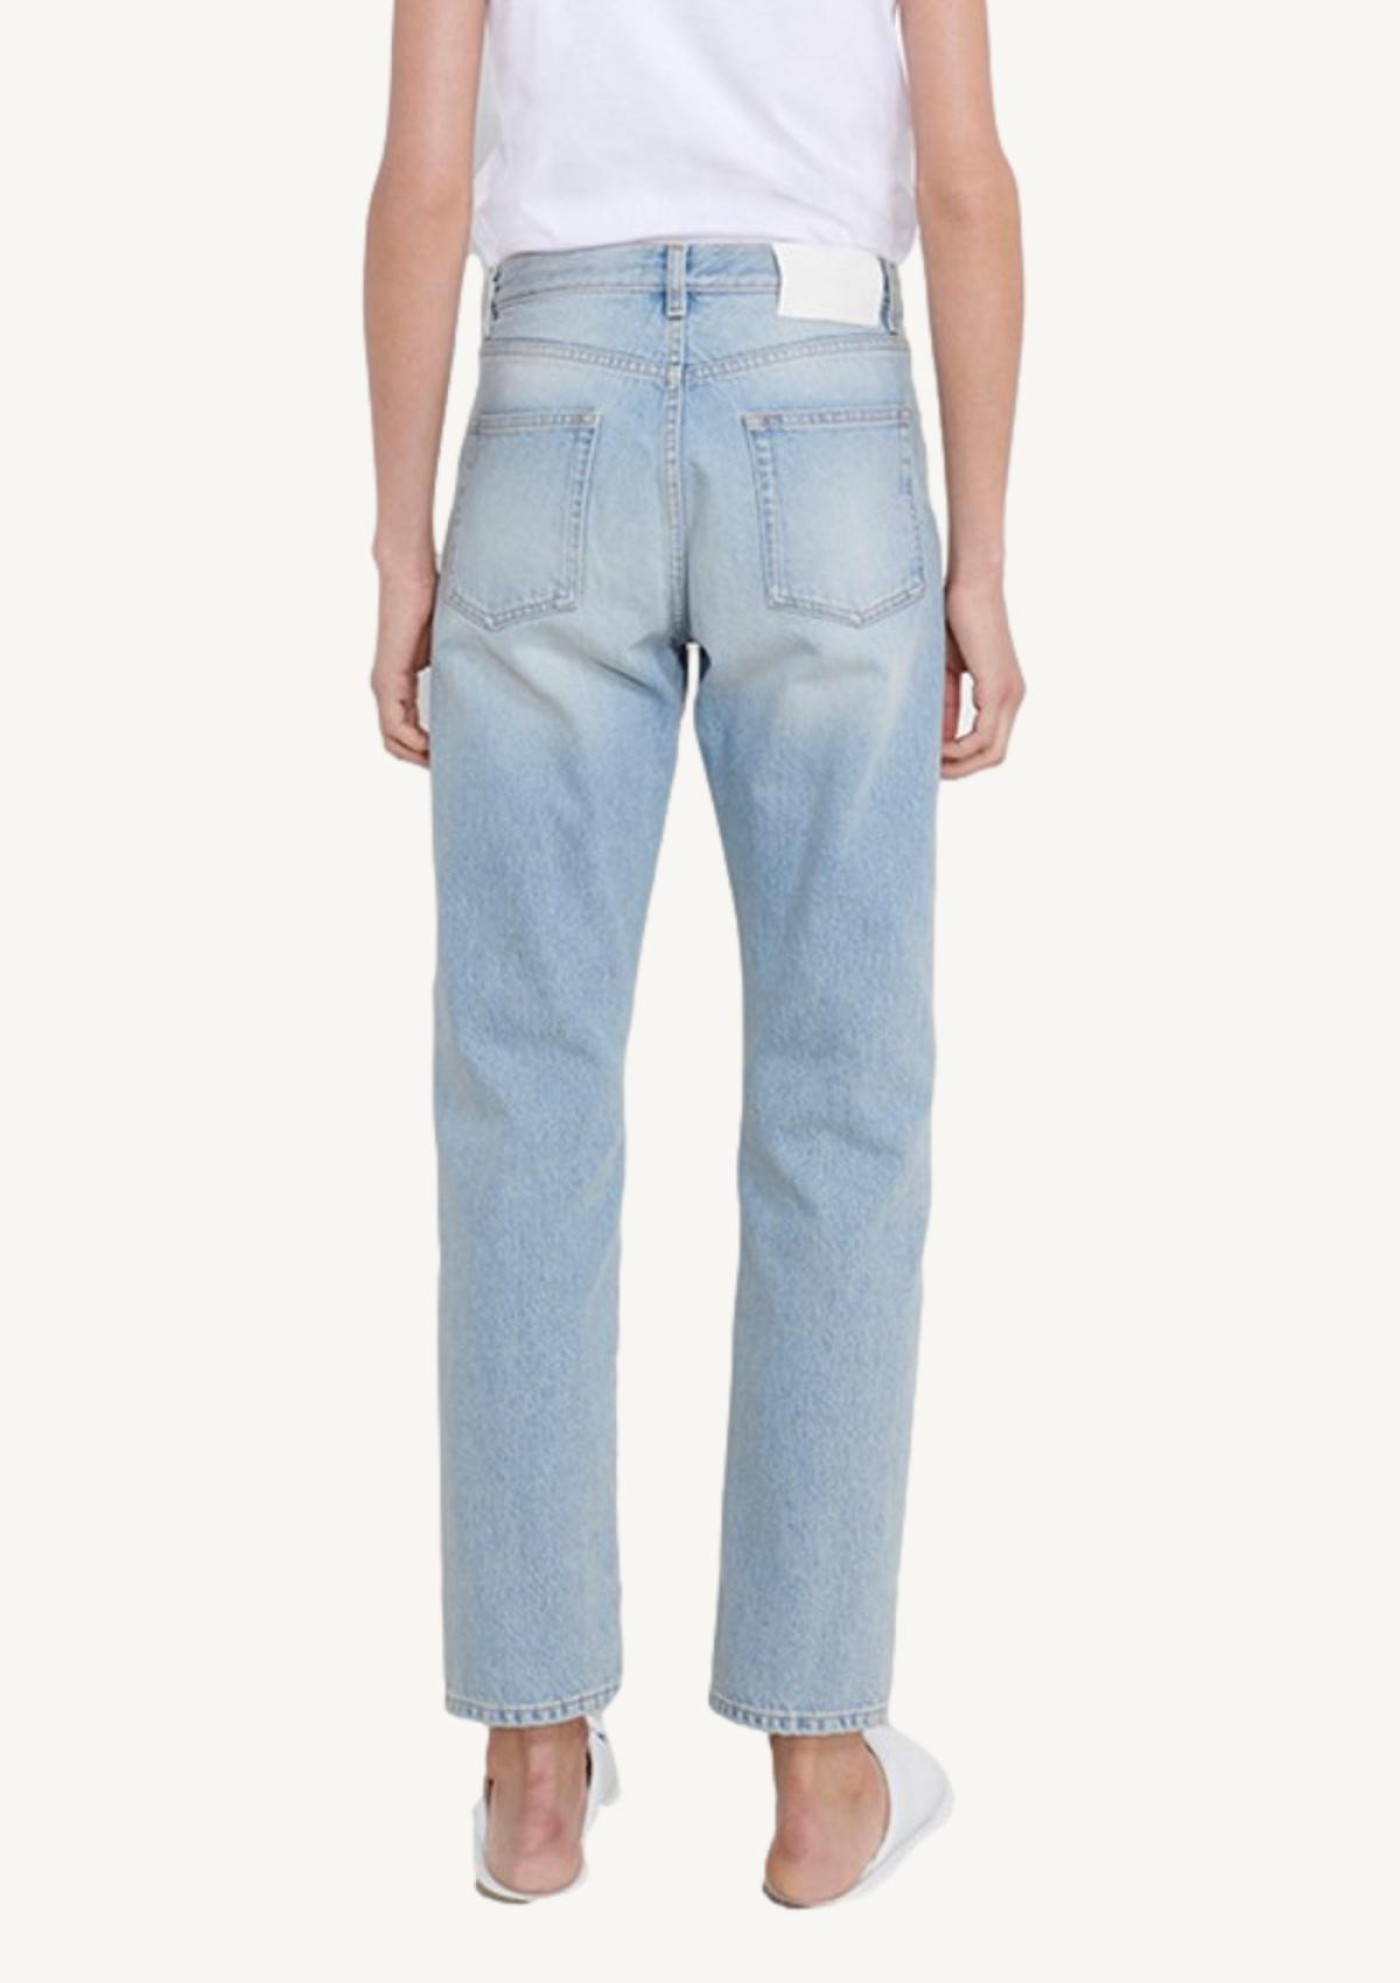 Washed light blue WULAR straight pants in ivory denim